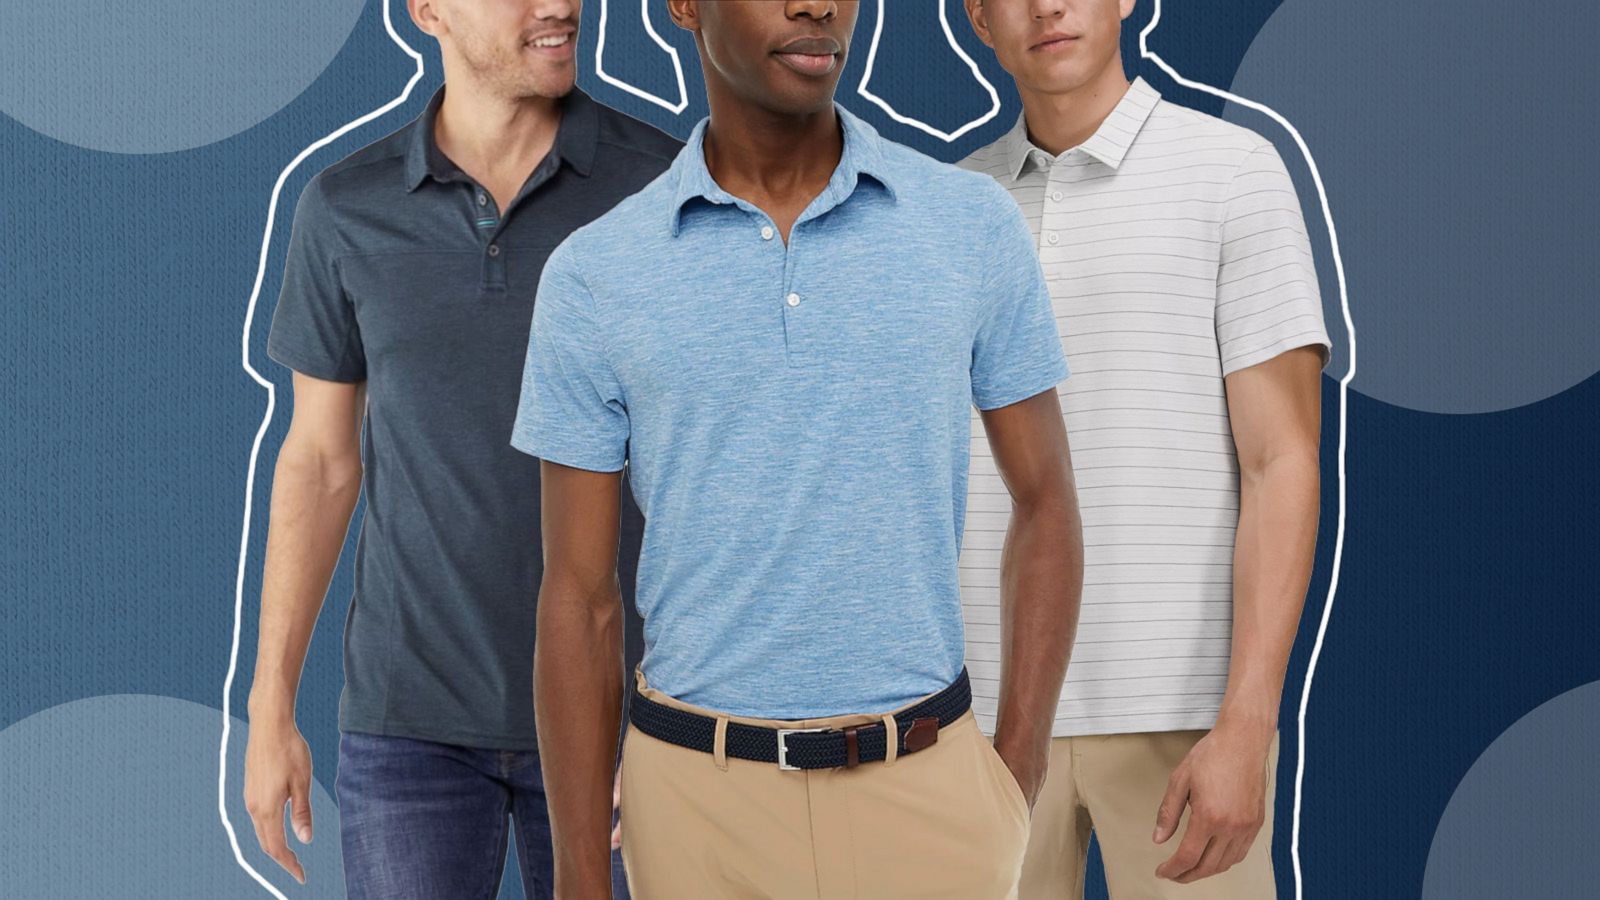 Shop men's polo shirts for summer: Moisture-wicking, for the office and  more - Good Morning America